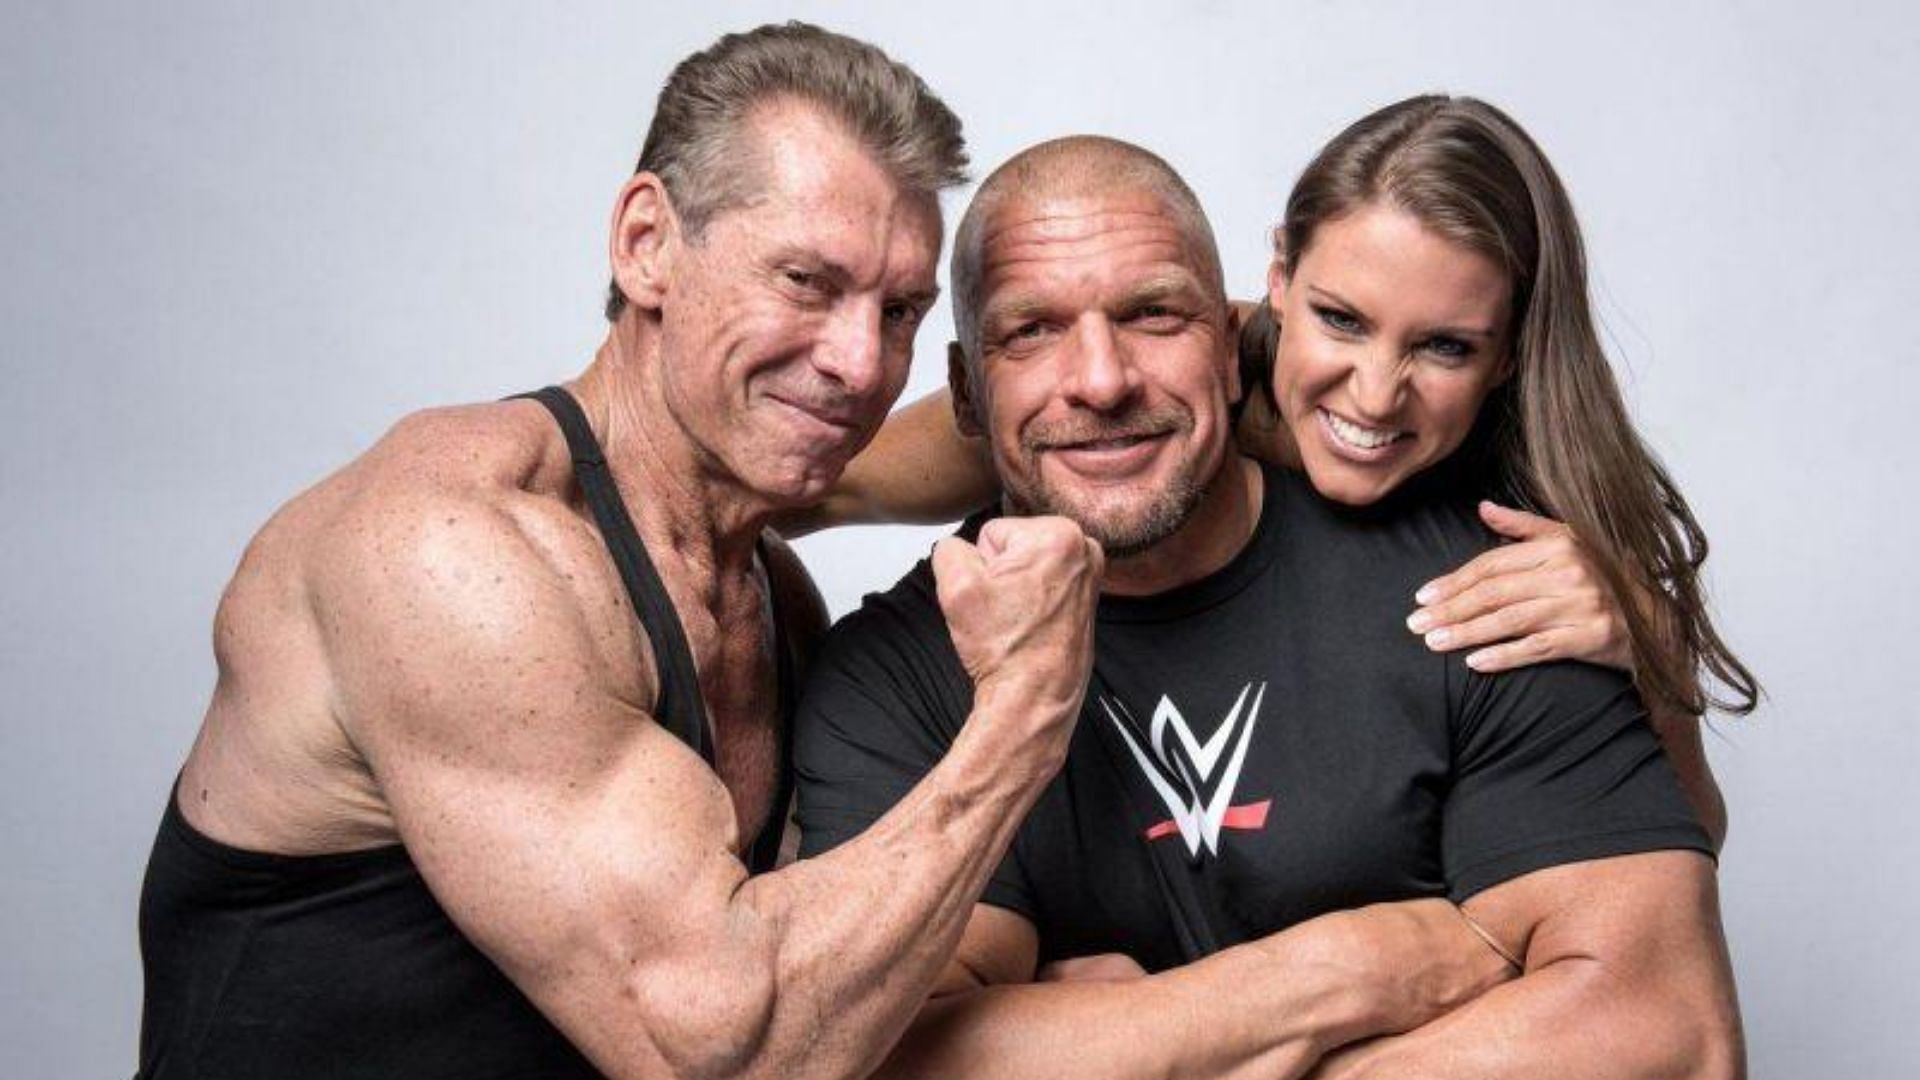 Vince McMahon returned to WWE to seemingly sell the company